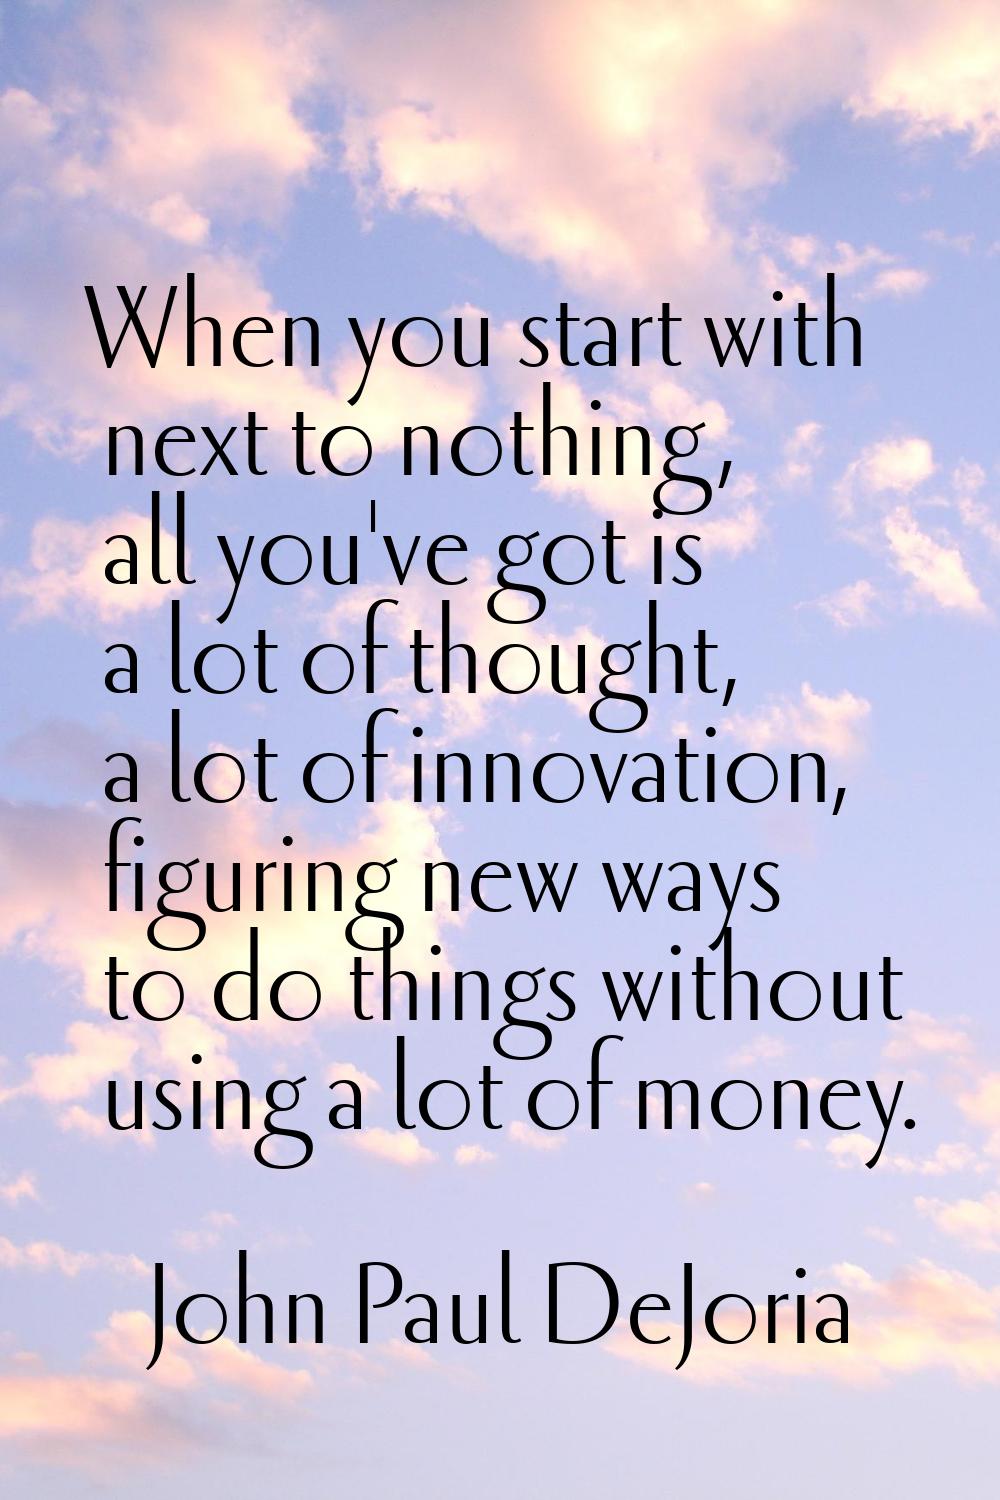 When you start with next to nothing, all you've got is a lot of thought, a lot of innovation, figur